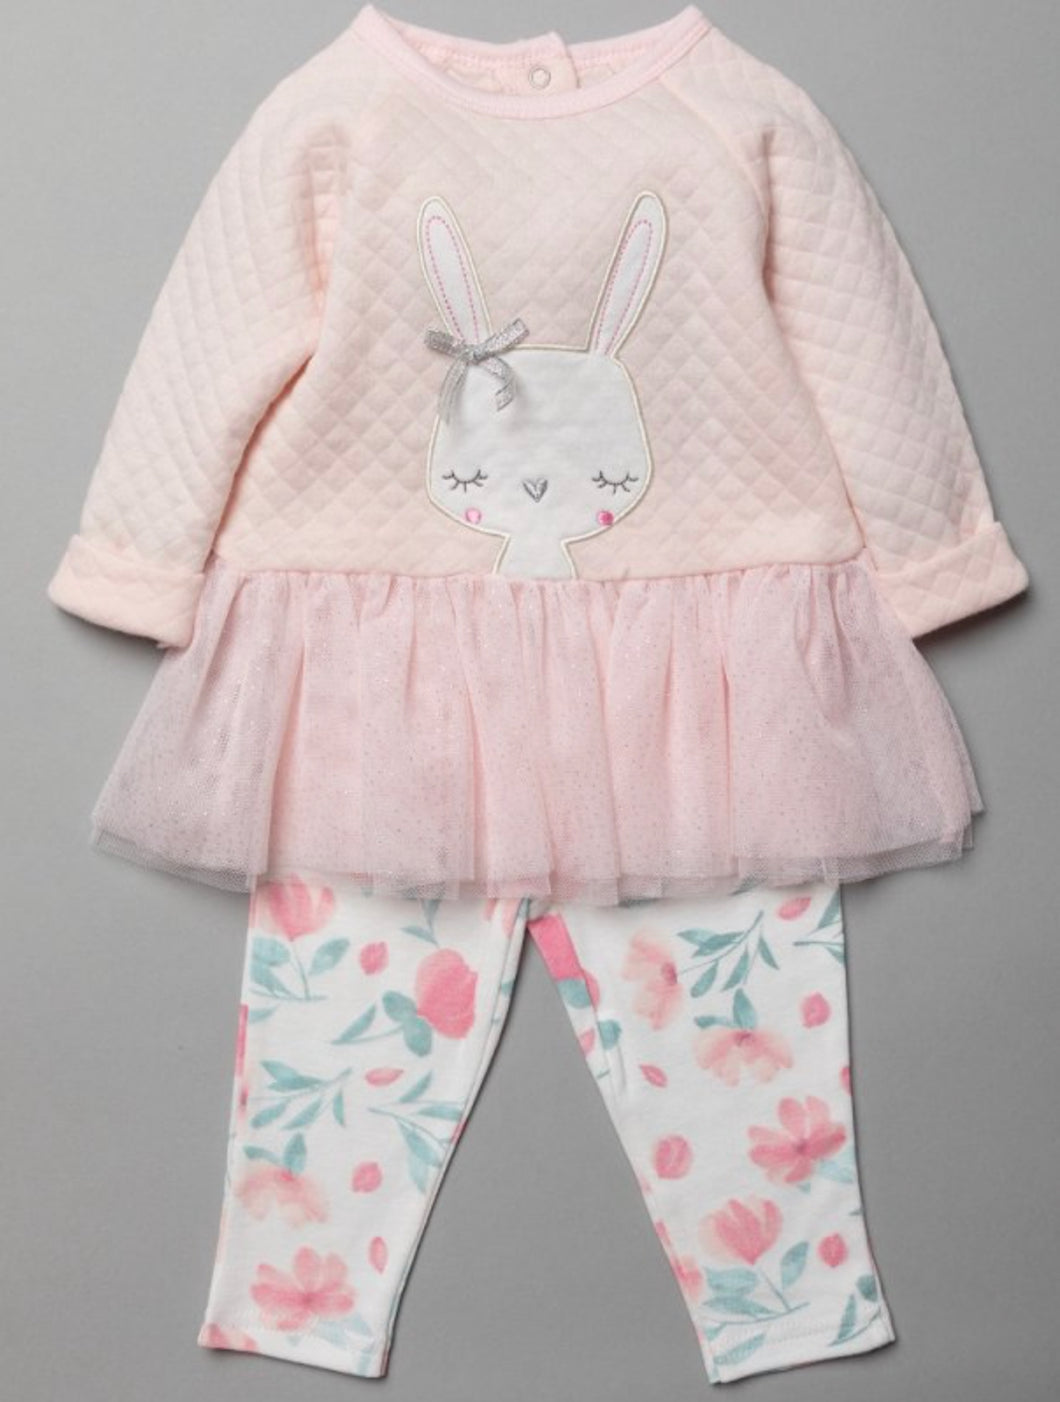 Branded Boutique 2 Piece Girls Outfit